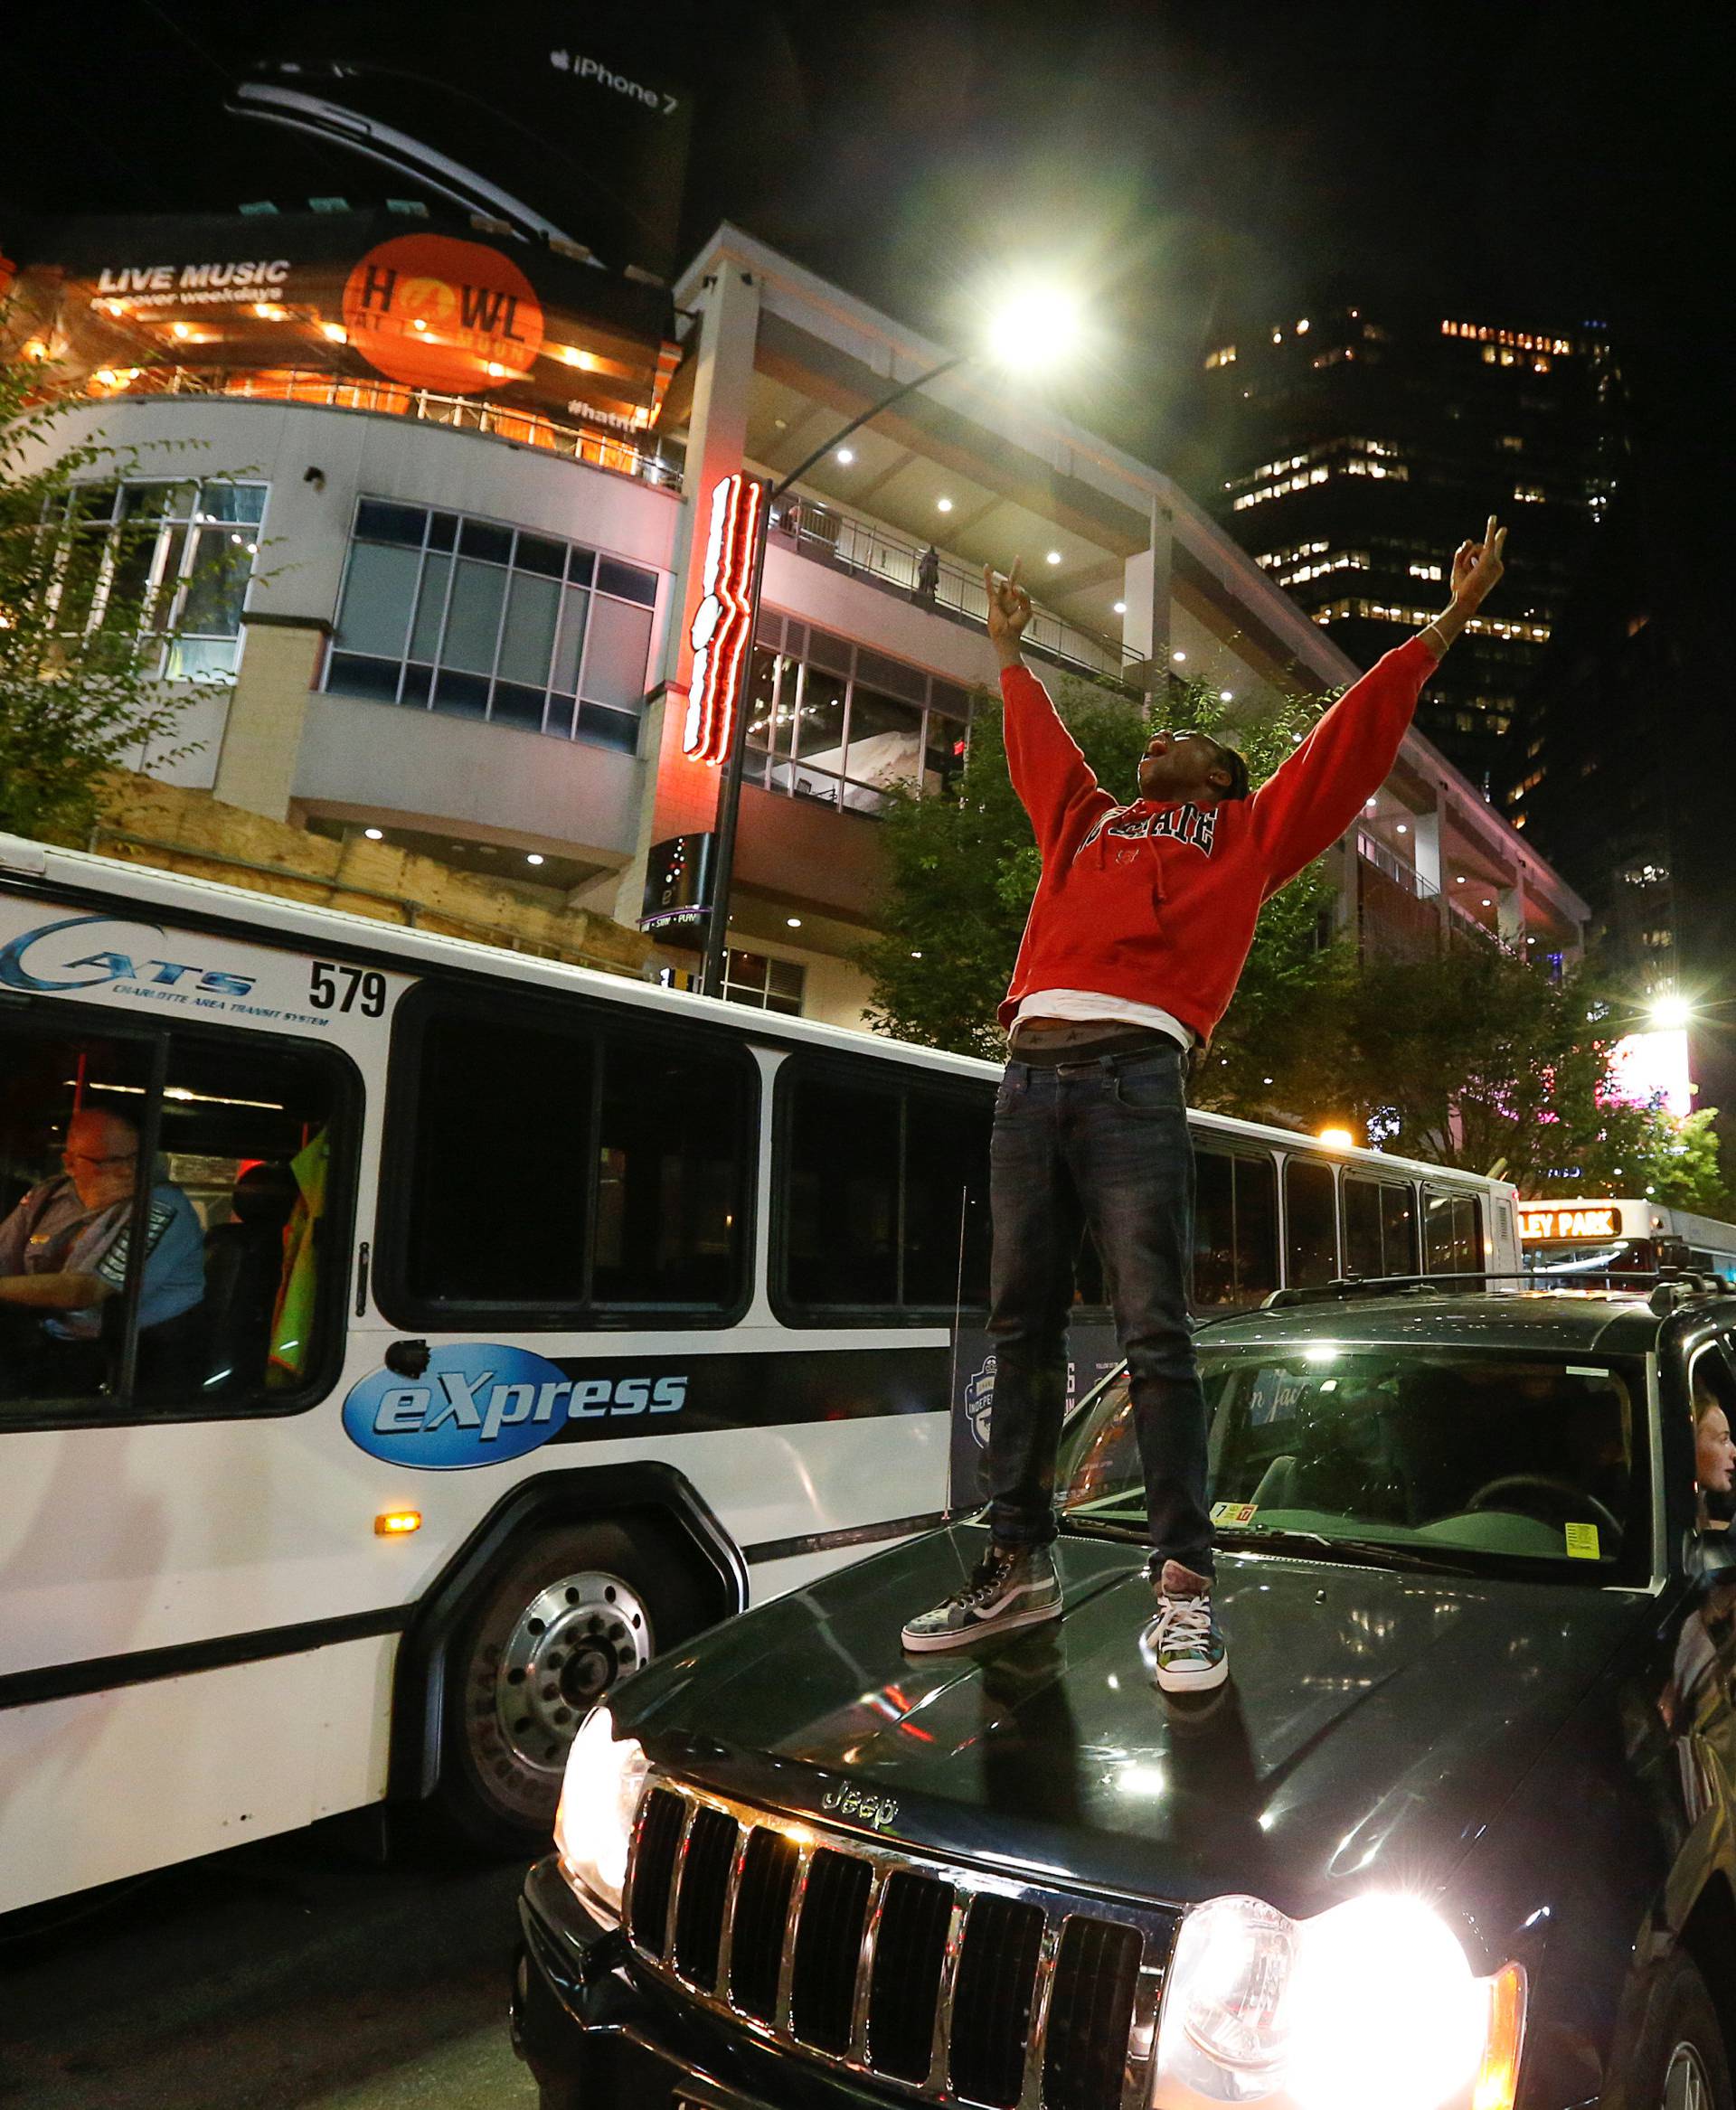 A man stands on a car in uptown Charlotte, NC to protest the police shooting of Keith Scott, in Charlotte, North Carolina